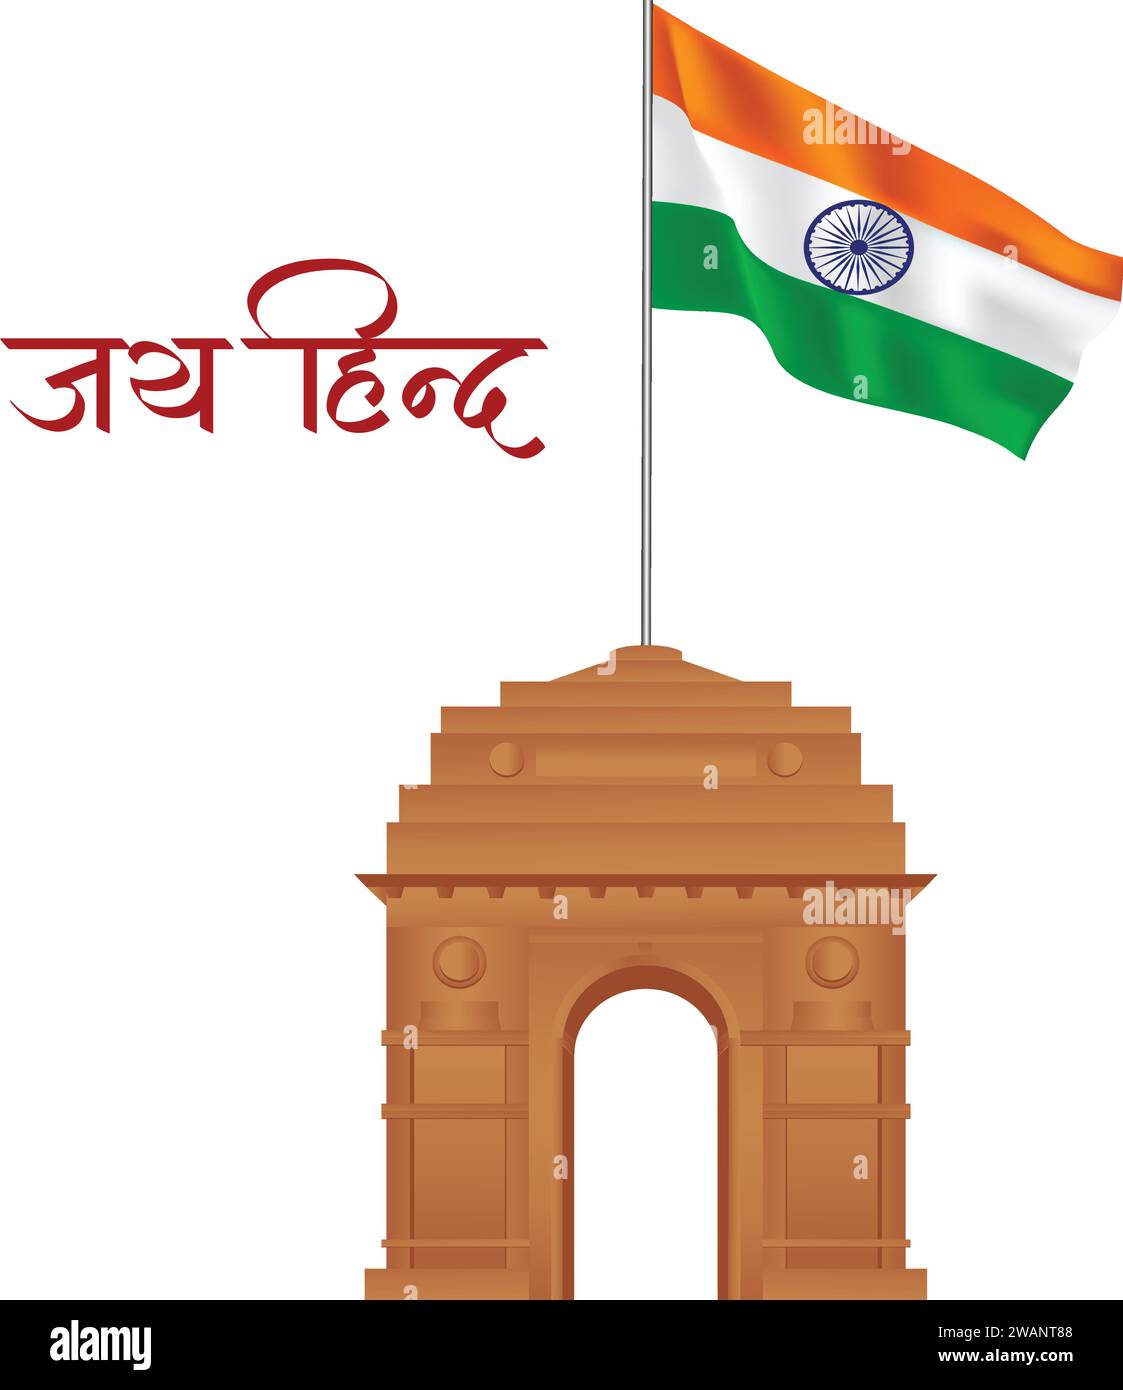 100,000 India gate Vector Images | Depositphotos